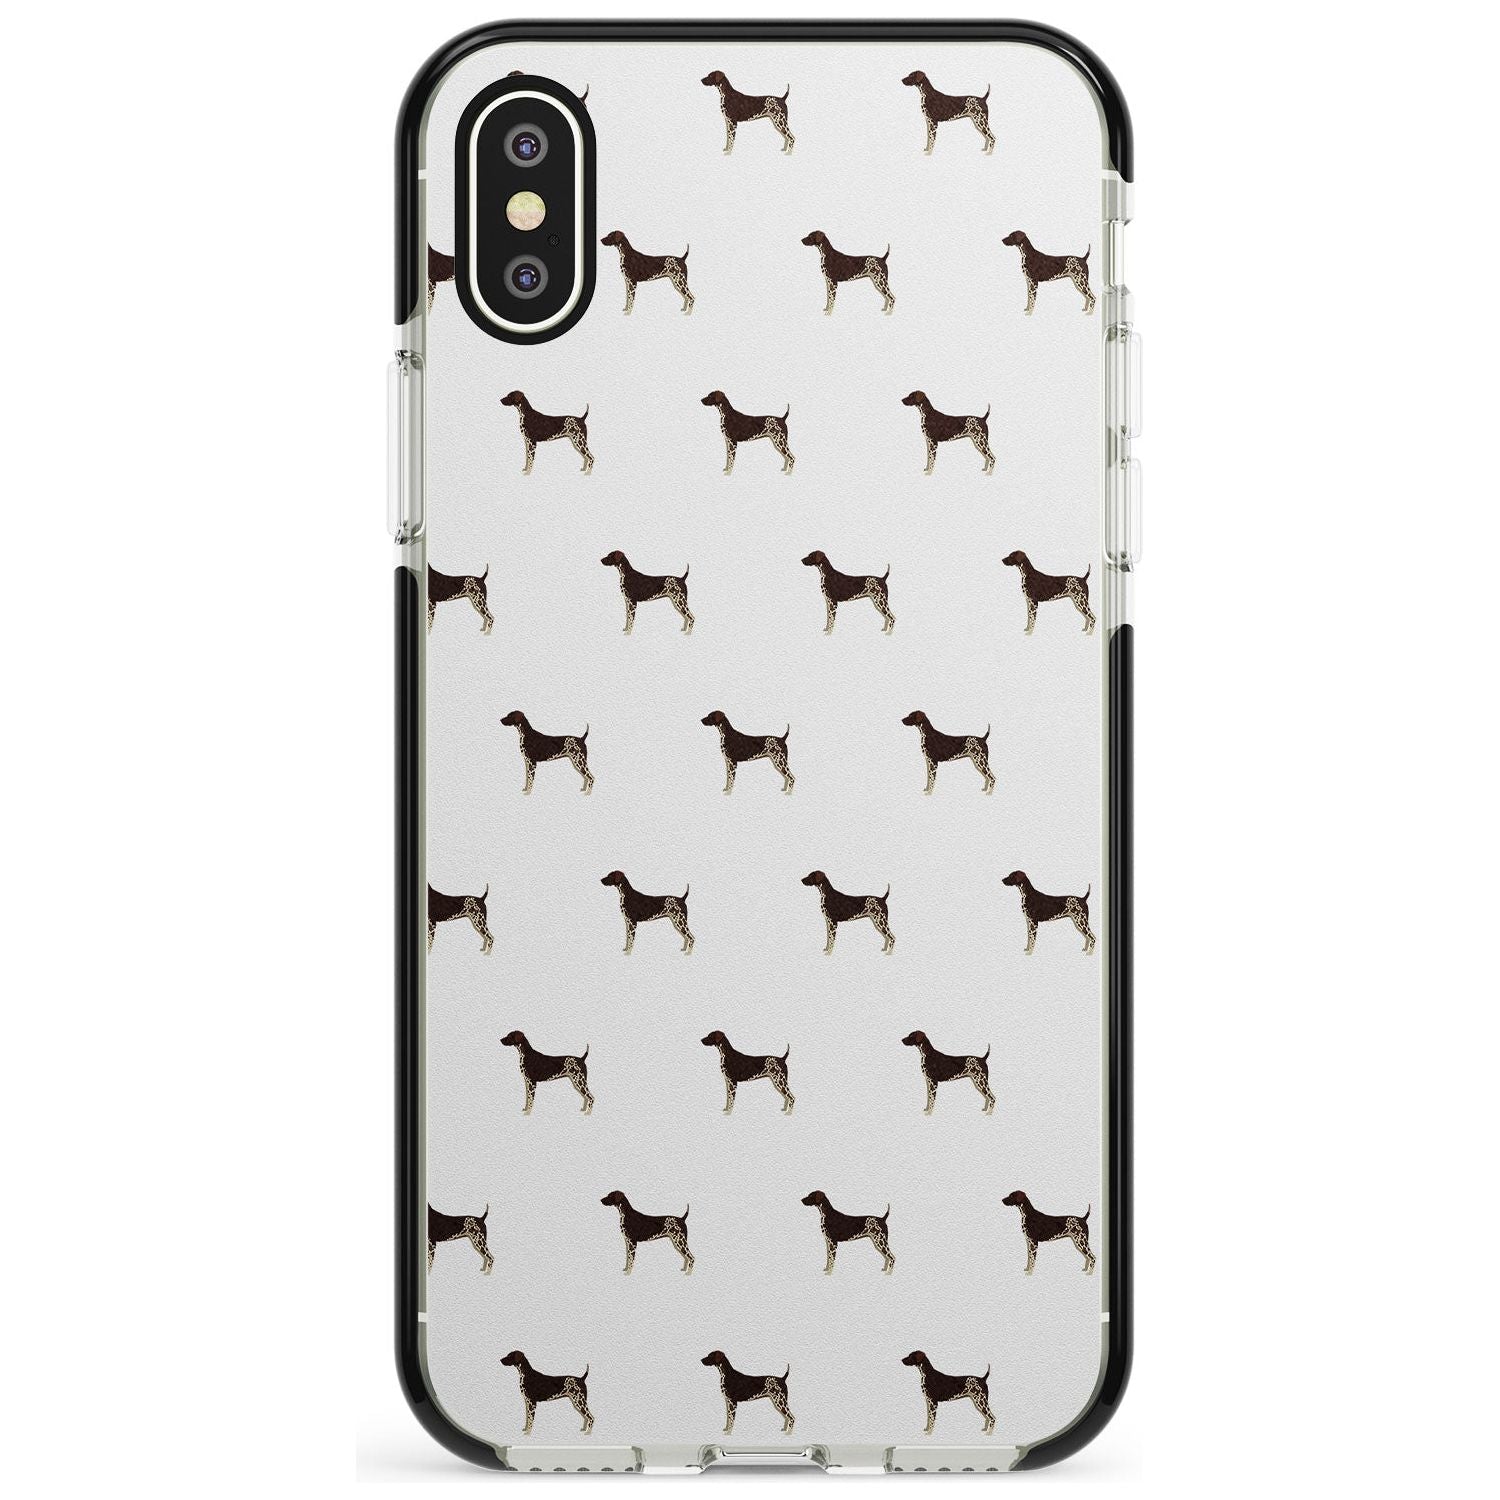 German Shorthaired Pointer Dog Pattern Black Impact Phone Case for iPhone X XS Max XR